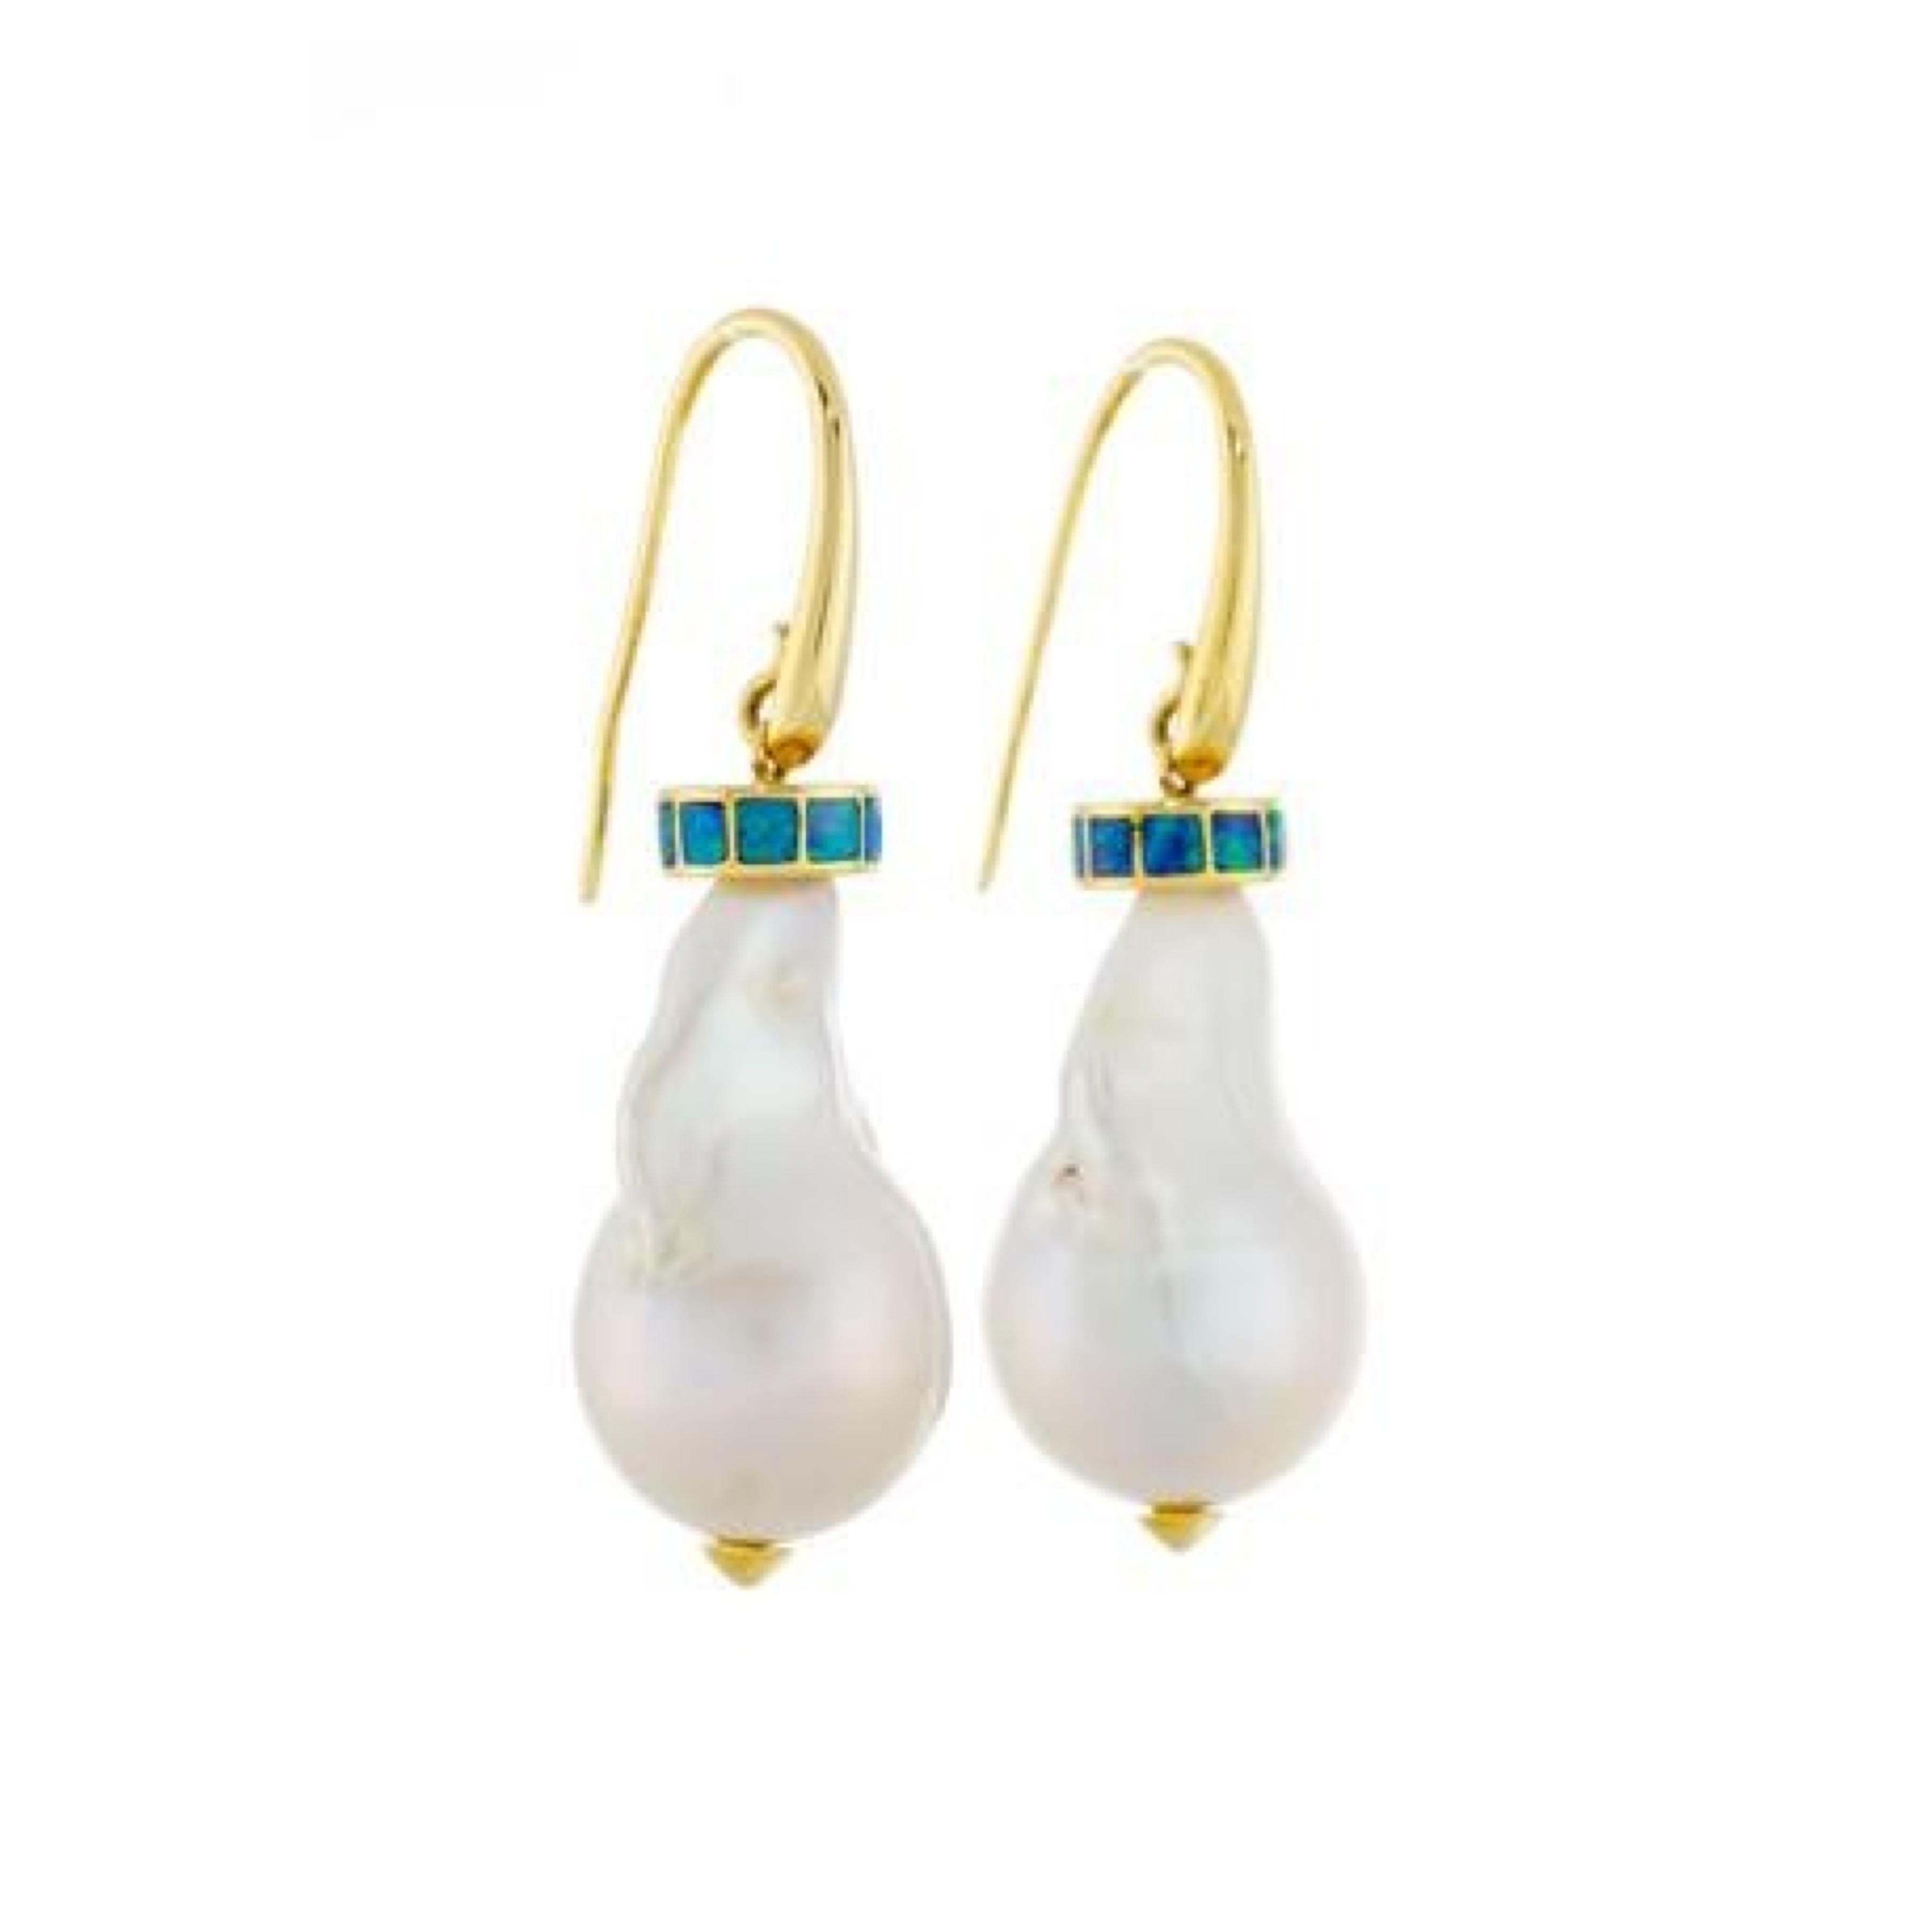 Pair of yellow gold earrings holding baroque cultured pearls topped with small opal squares.

Length of the pendants: 48 mm (1.88 inch)

Approximate size of the pearls: 25 x 15.5 mm (0.98 x 0.61 inch)

Total estimated weight of the opals: 0.60